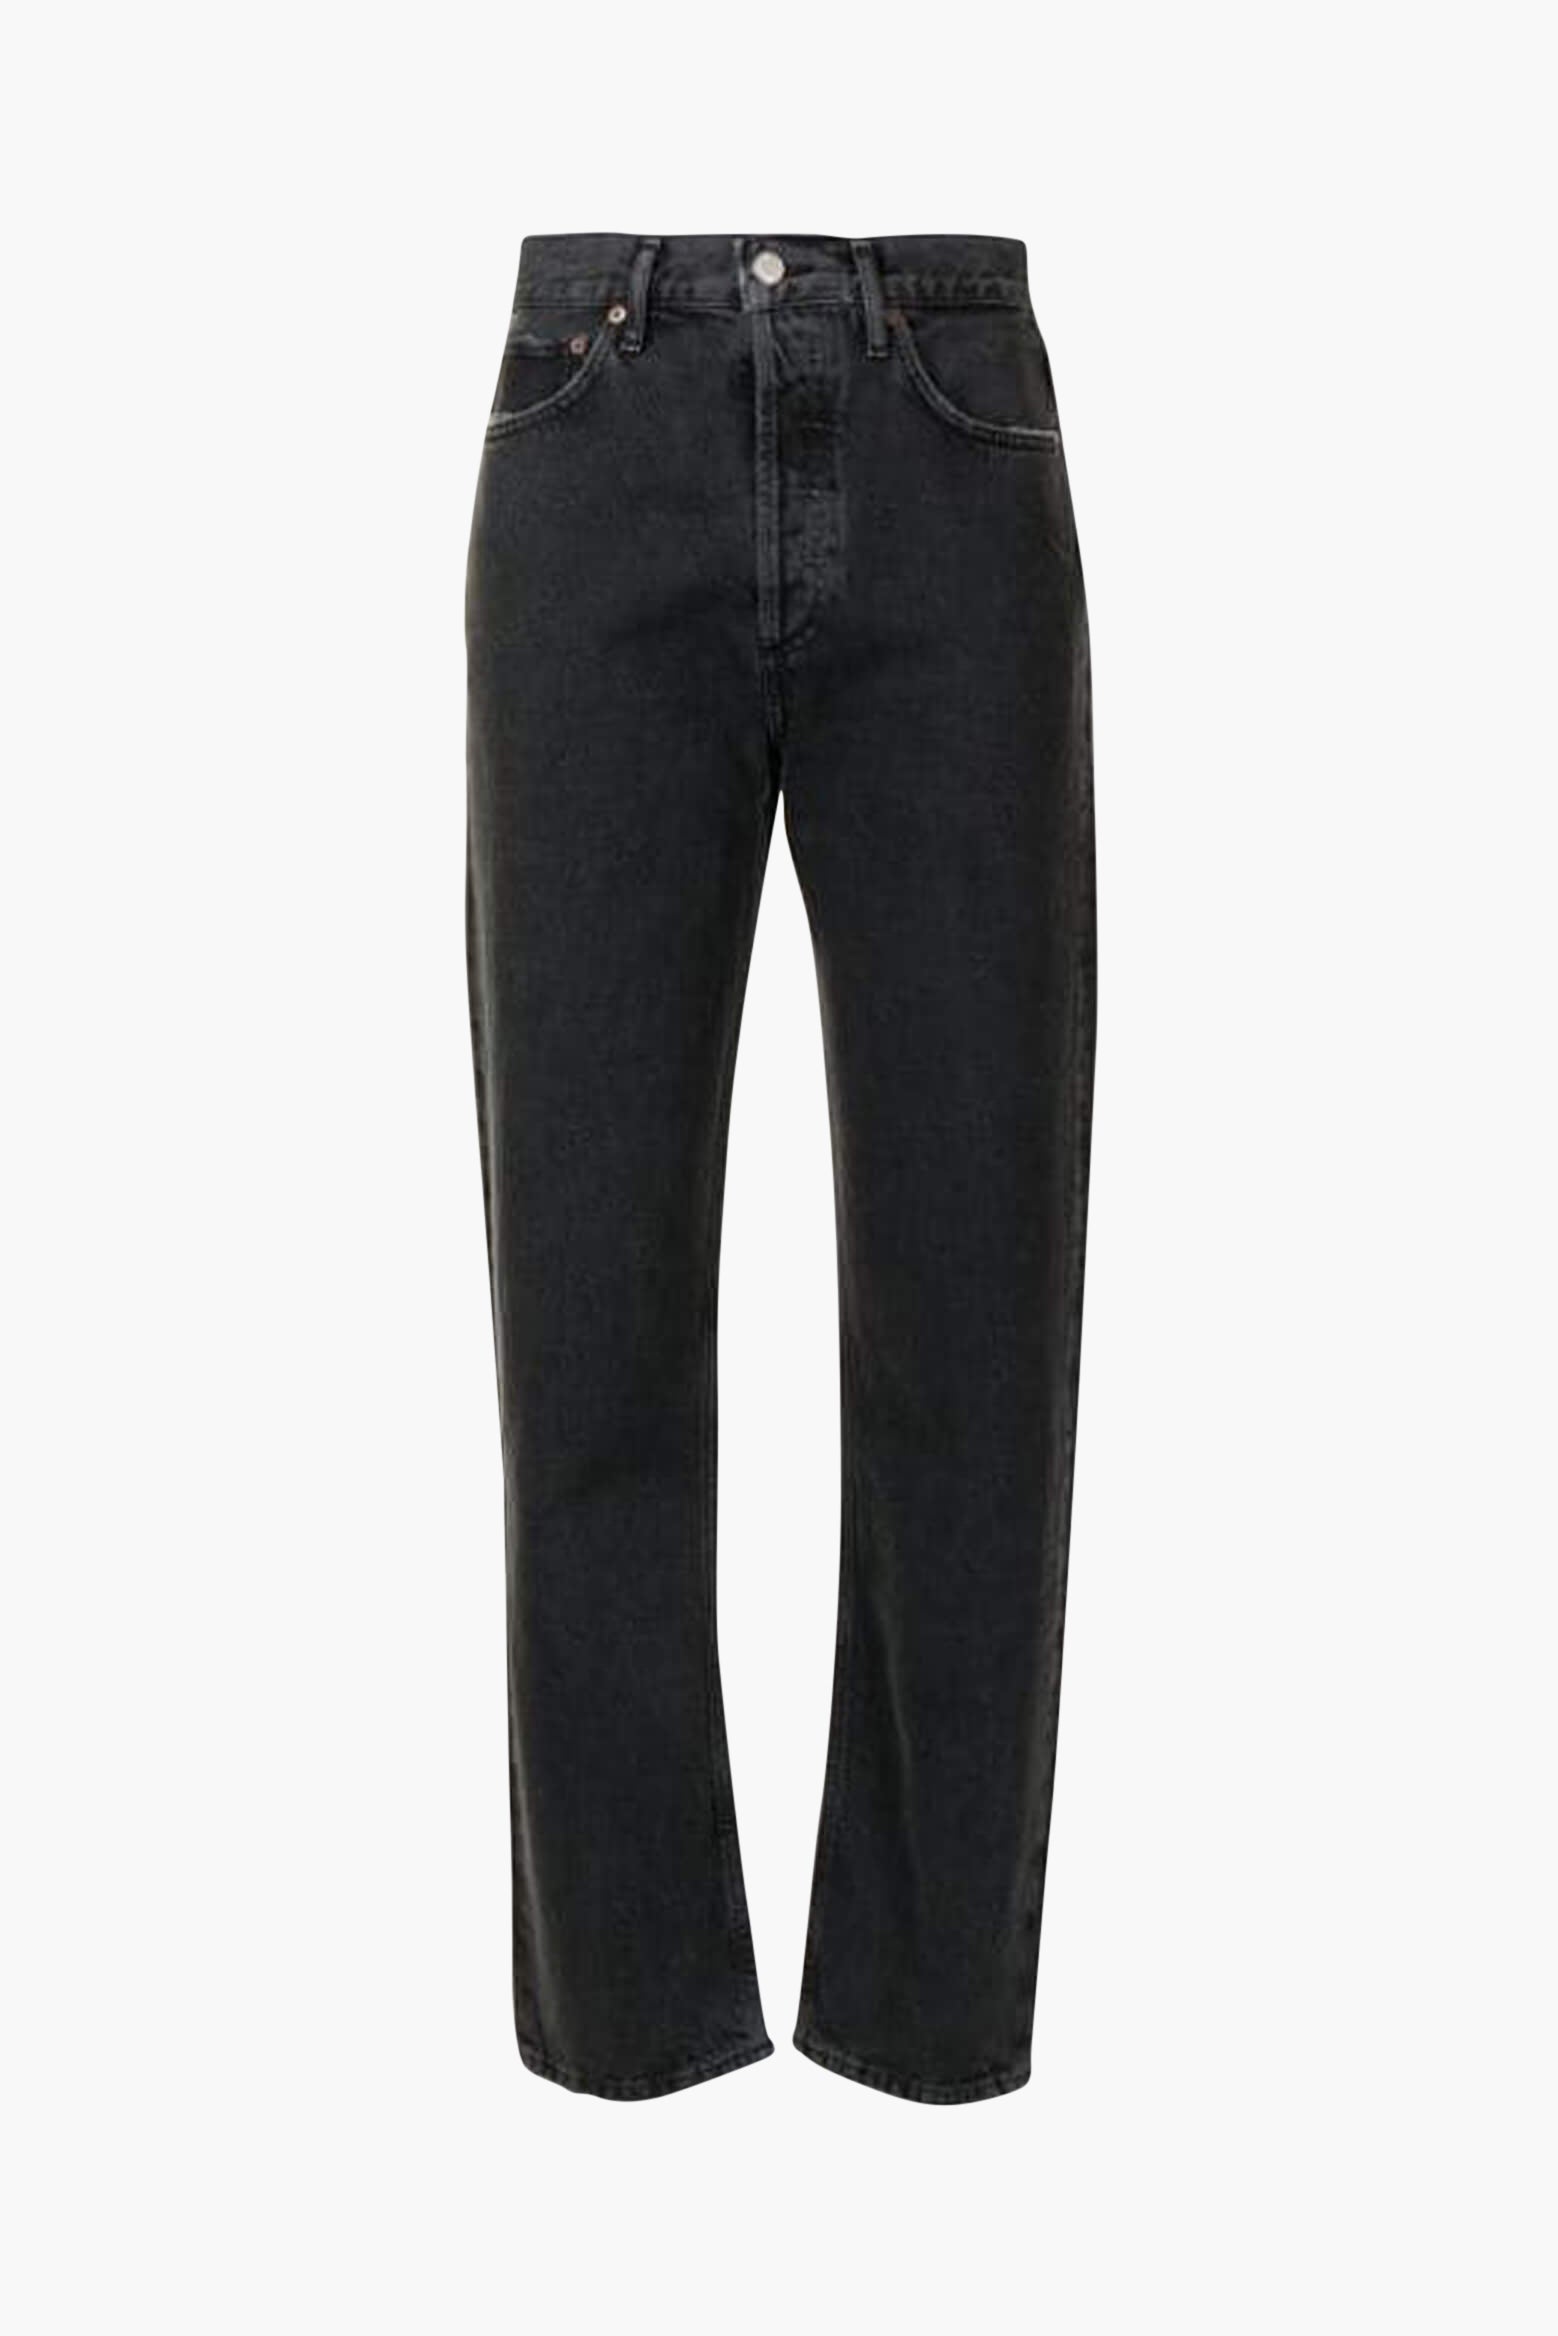 Agolde 90's Pinch Waist Jean in Black Tea from The New Trend